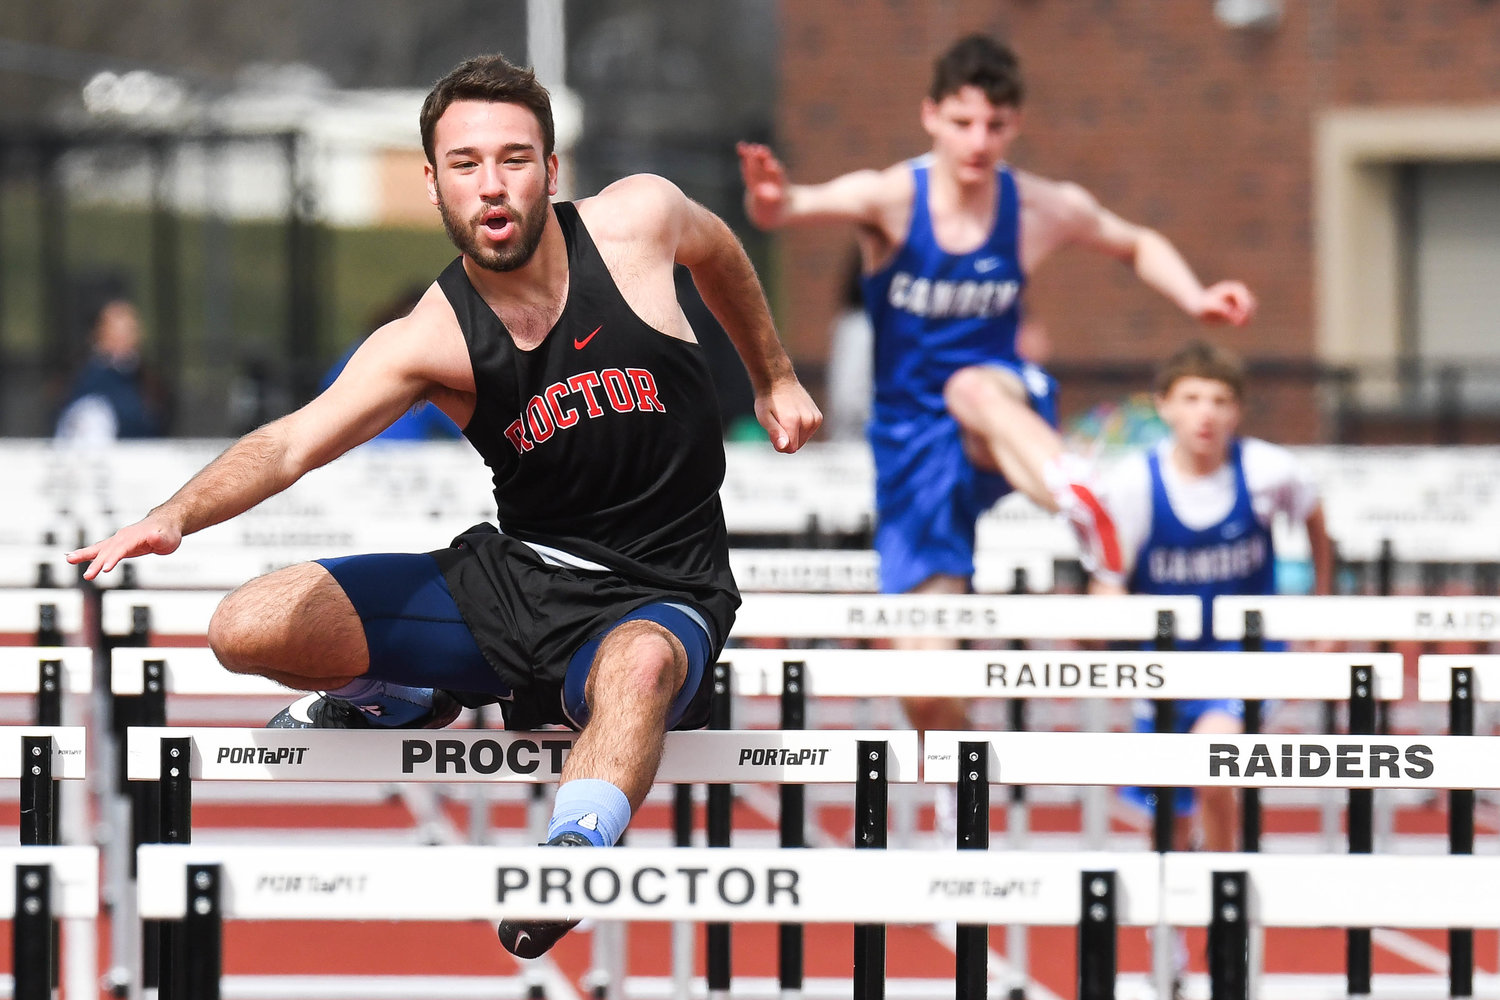 RELAY RACERS — Thomas R. Proctor High School runner Devin Muniz competes in the 110-meter hurdle event during a track and field relay meet on Tuesday at PHS Stadium in Utica. The two Proctor hurdlers won the relay and the Raiders won the overall event.